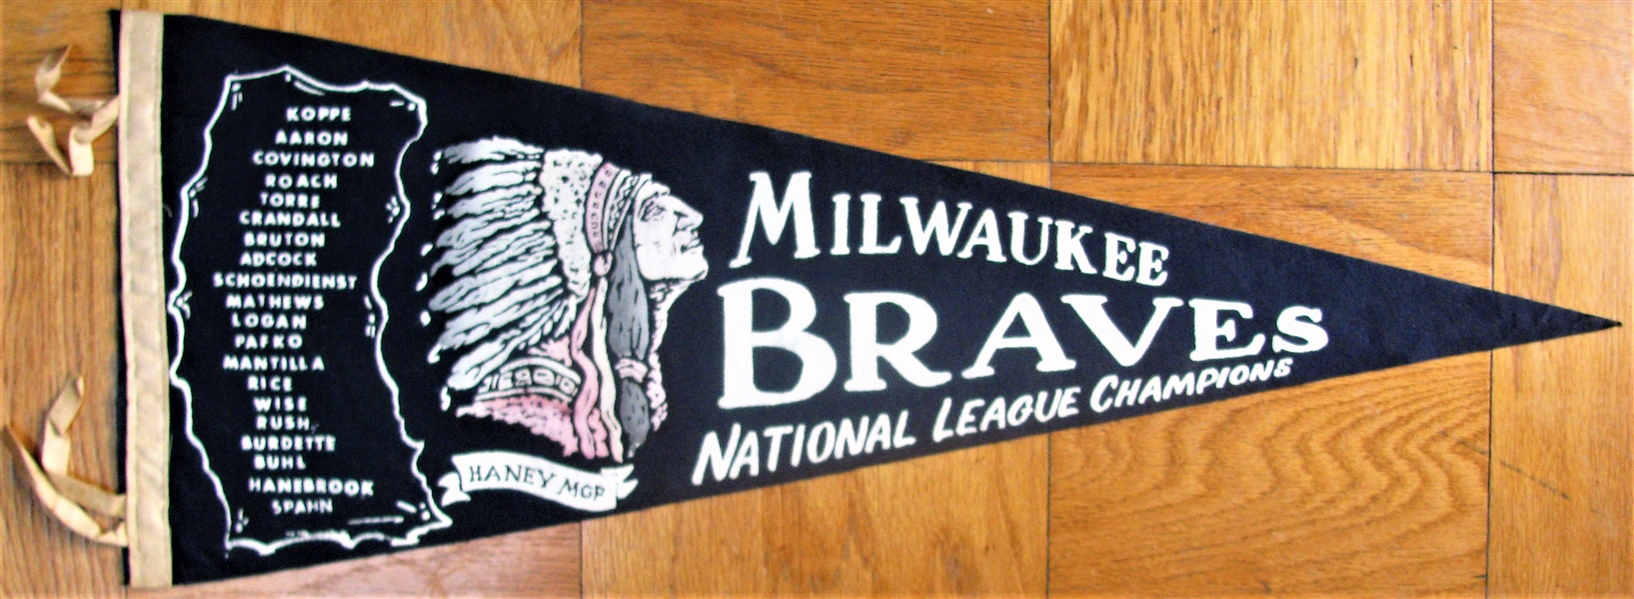 1958 MILWAUKEE BRAVES NATIONAL LEAGUE CHAMPIONS SCROLL PENNANT